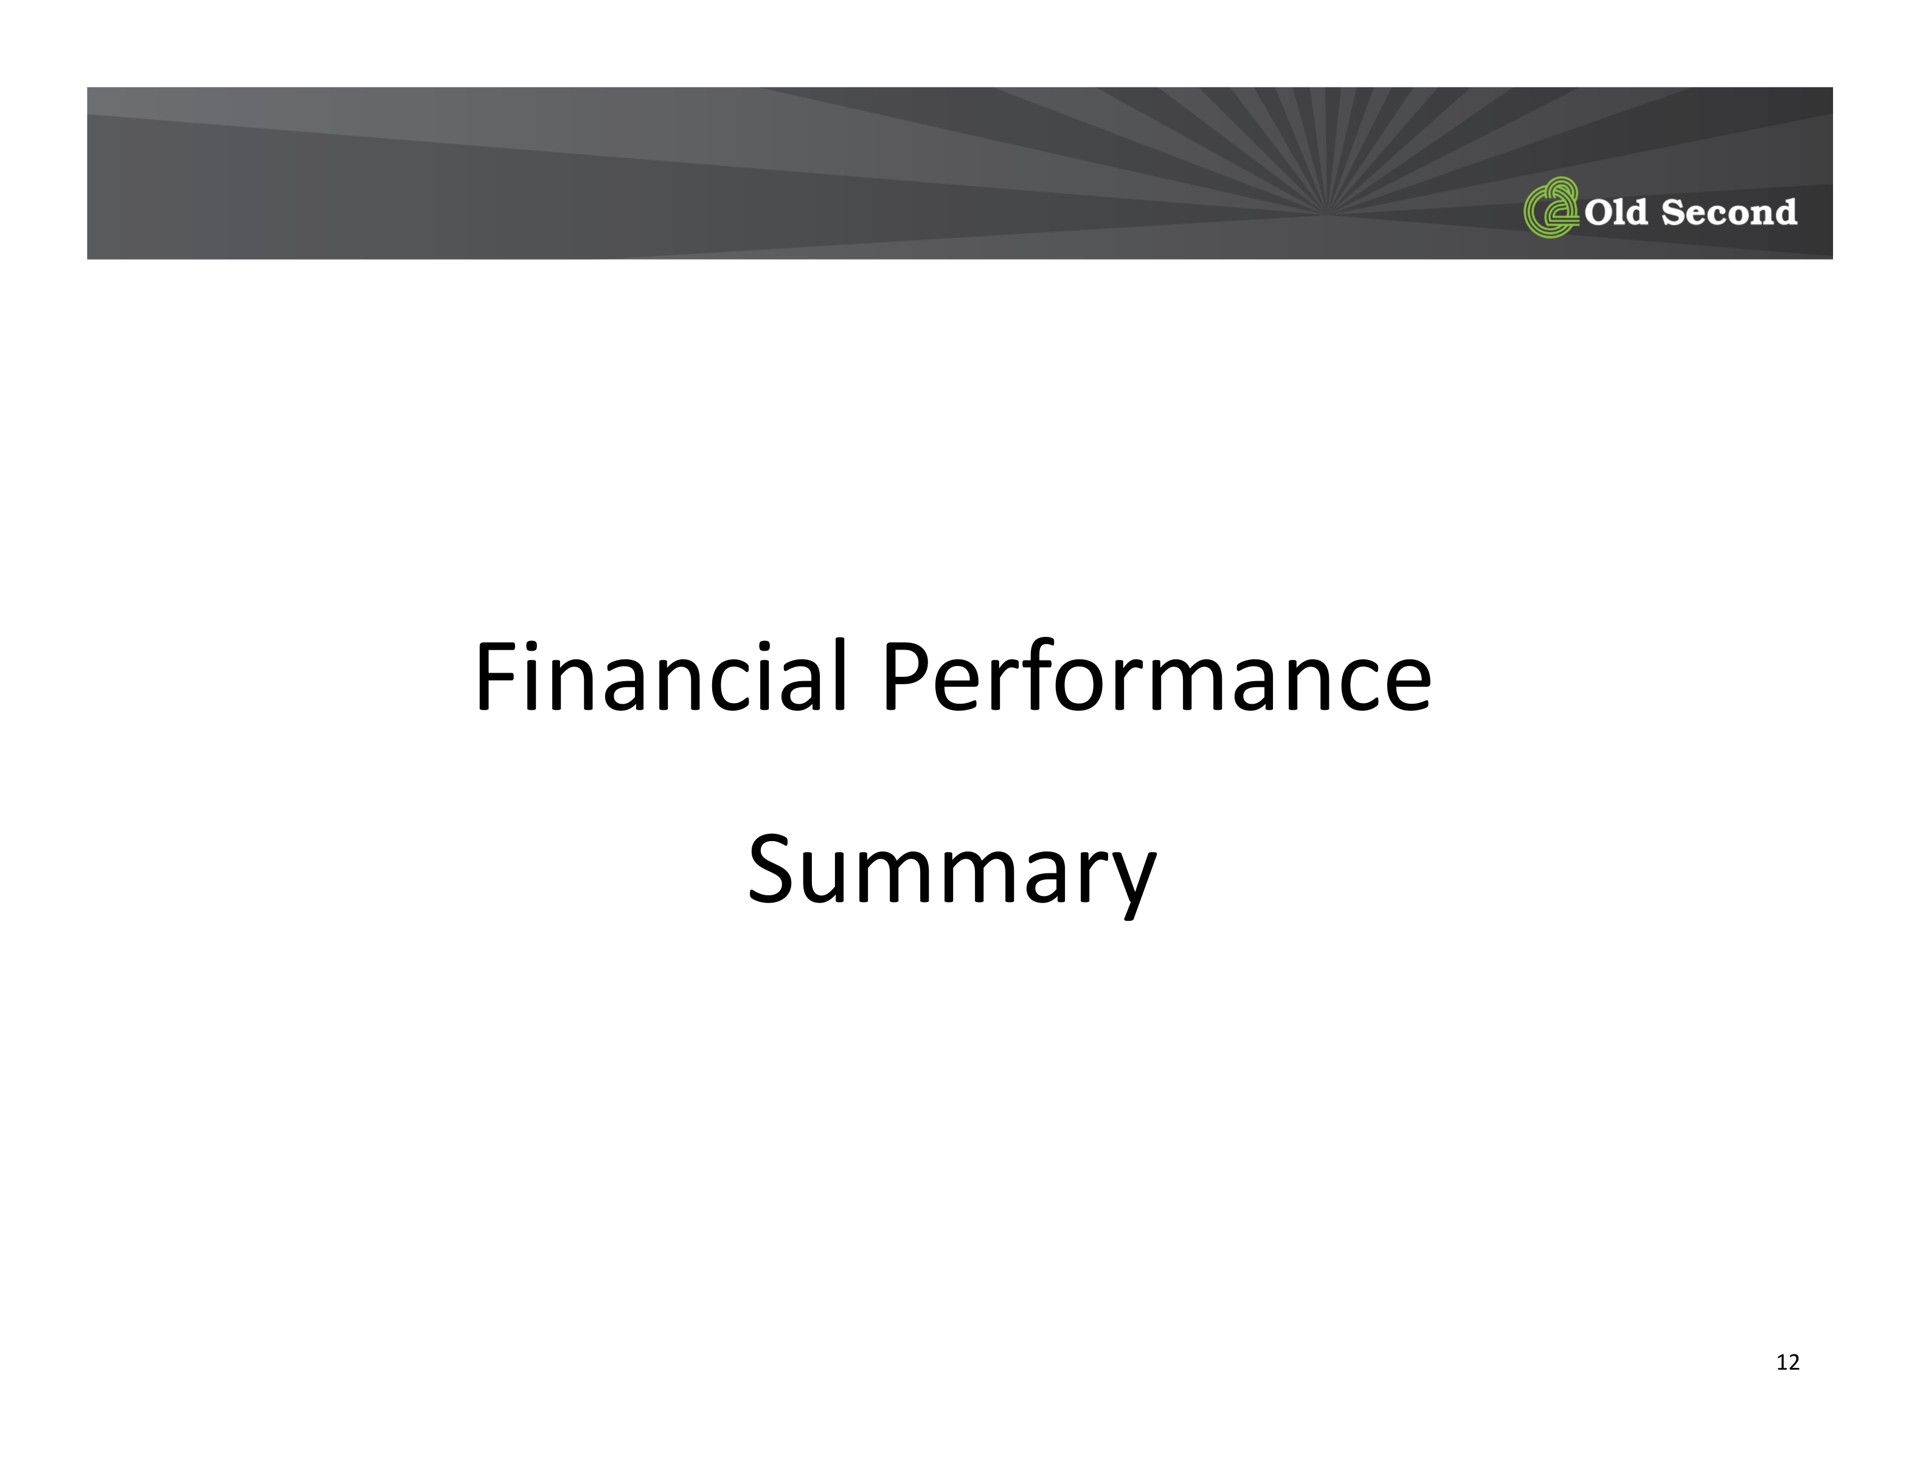 financial performance summary old second | Old Second Bancorp